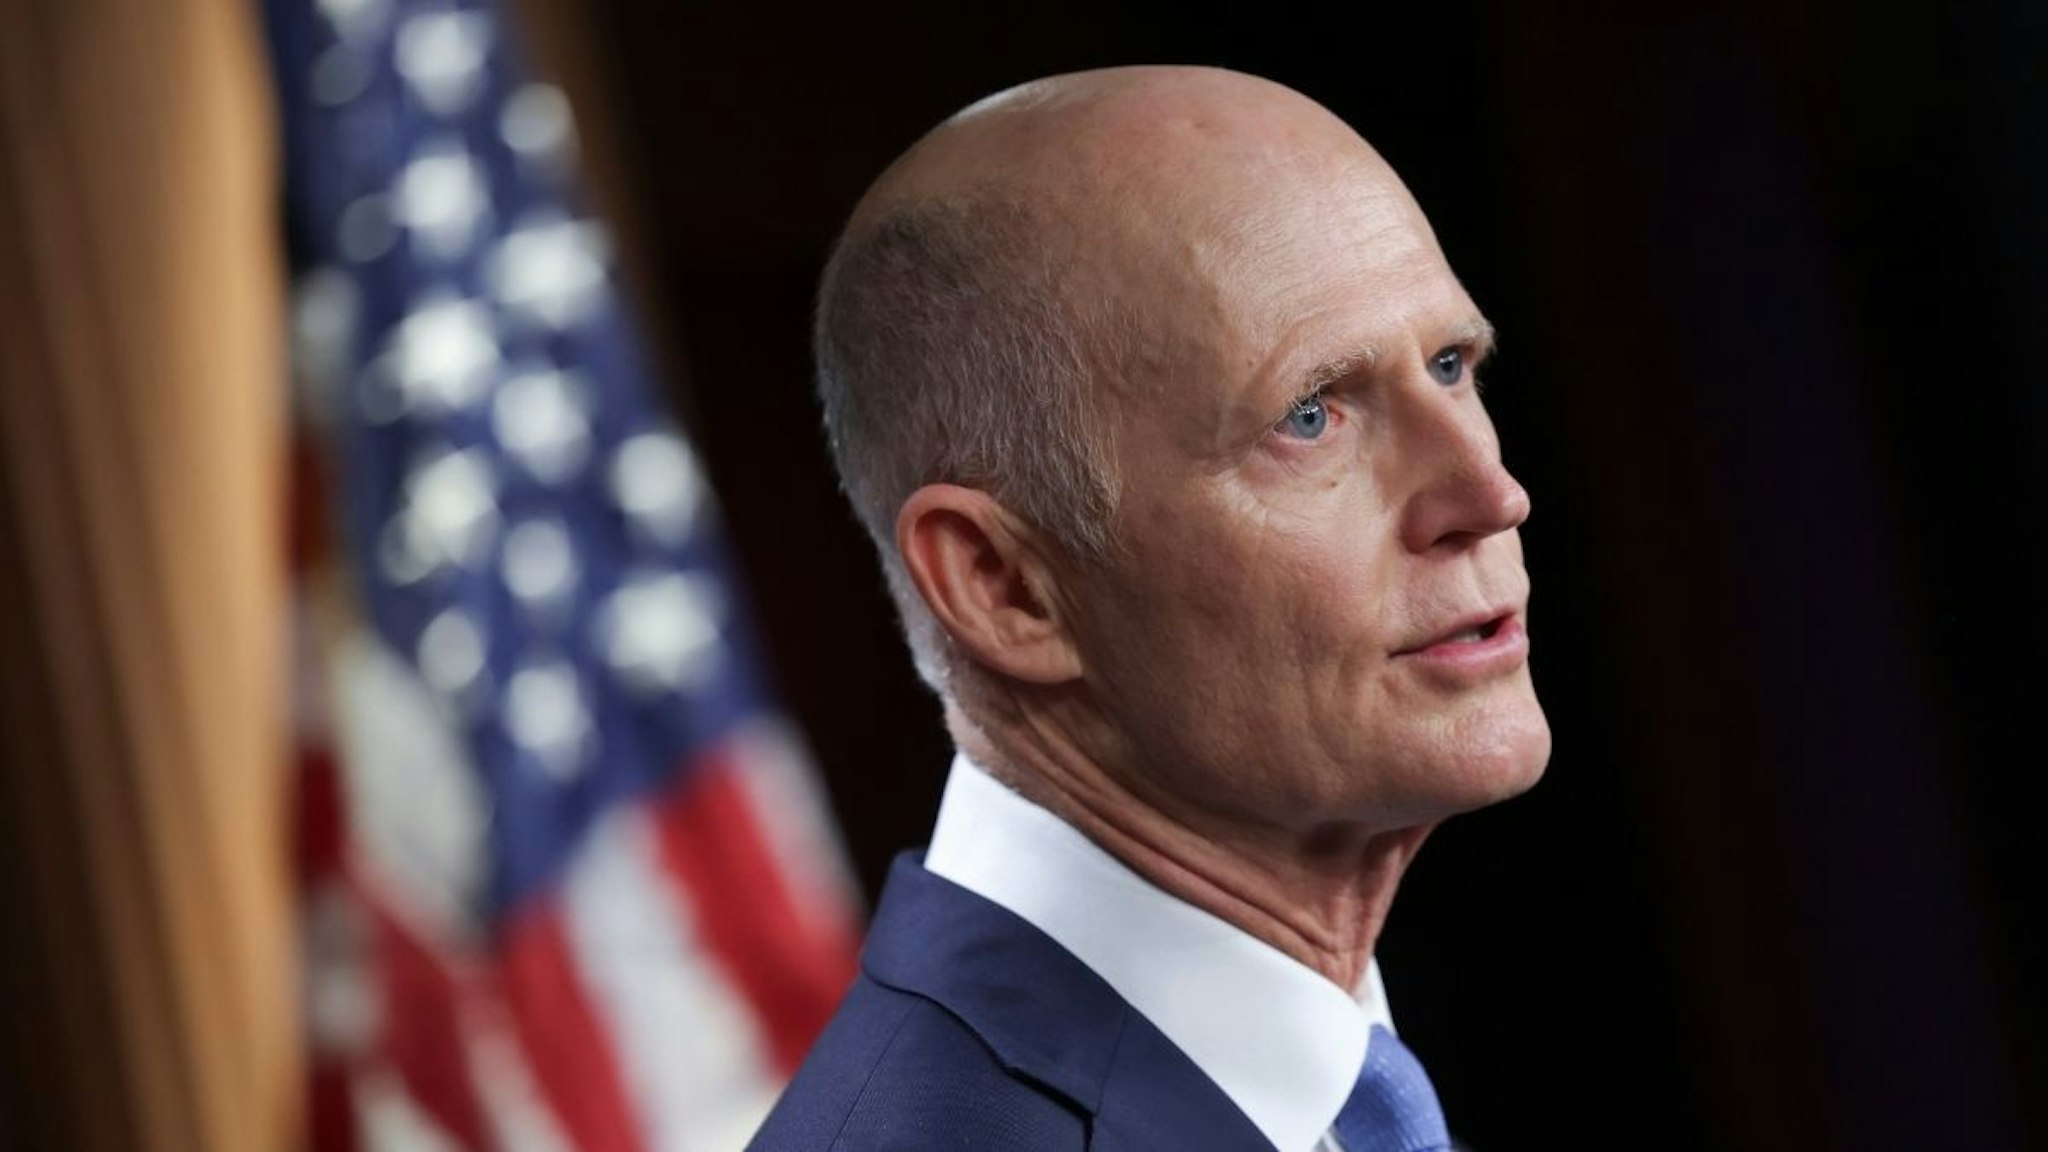 U.S. Sen. Rick Scott (R-FL) speaks on the economy during a news conference at the U.S. Capitol on May 04, 2022 in Washington, DC.